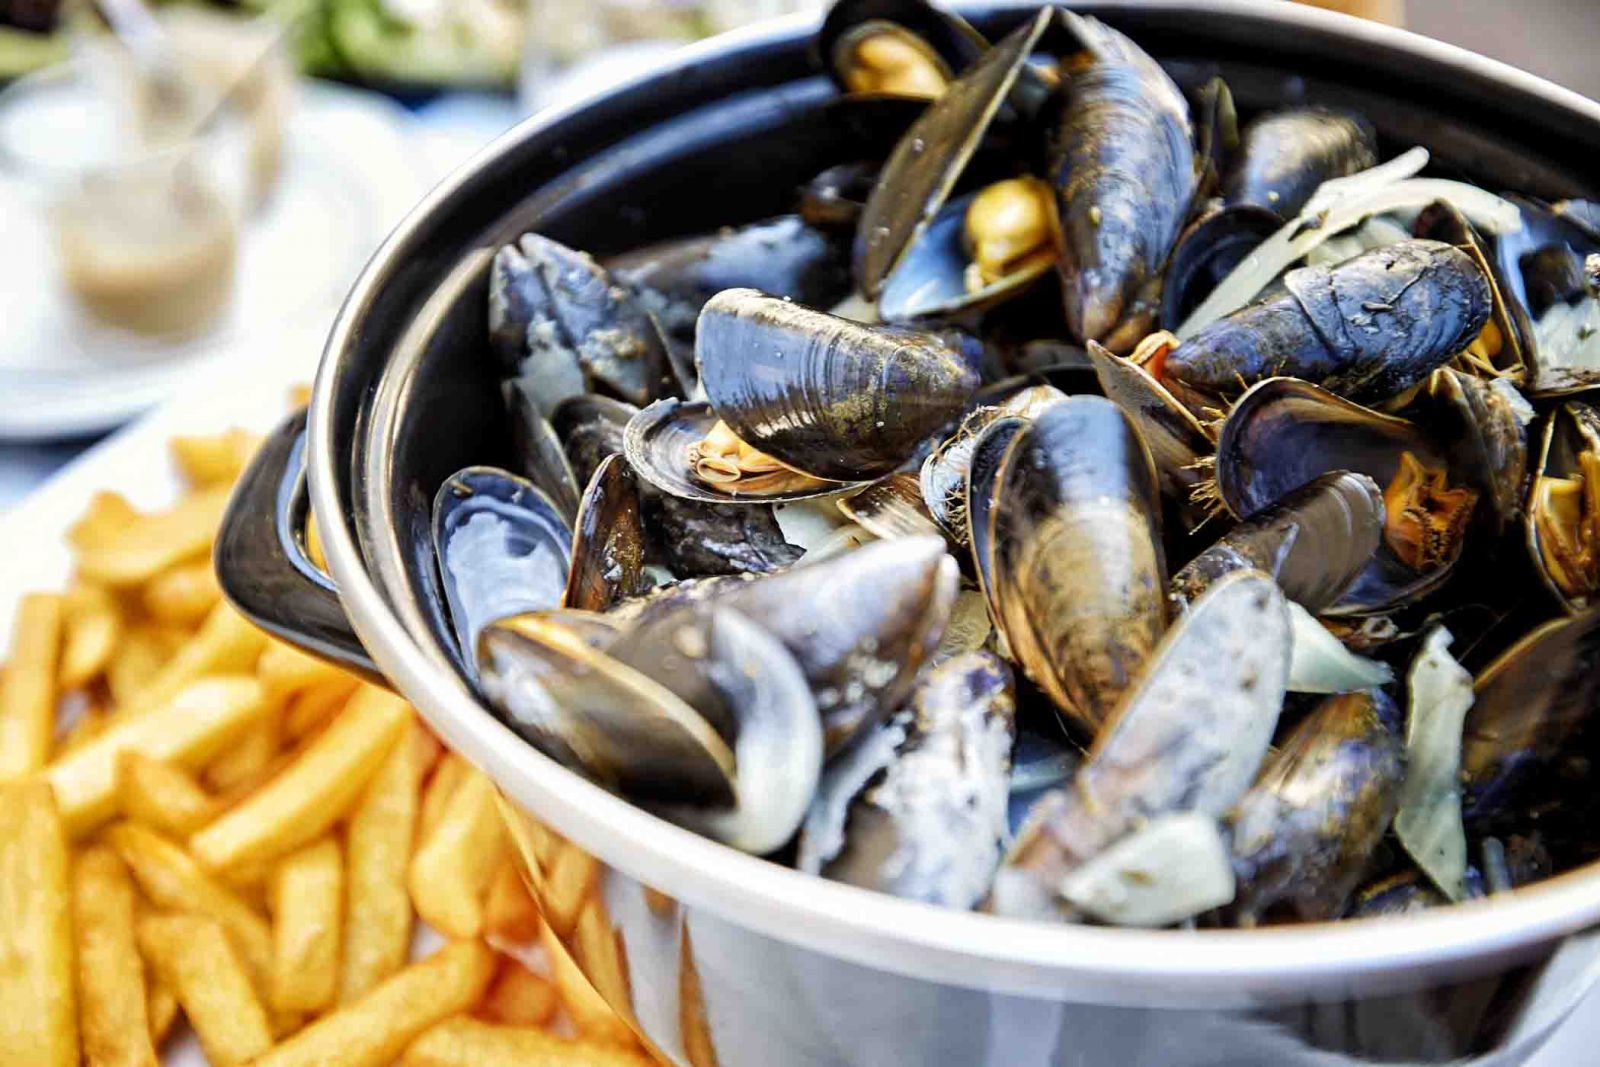 Fresh mussels and french fries